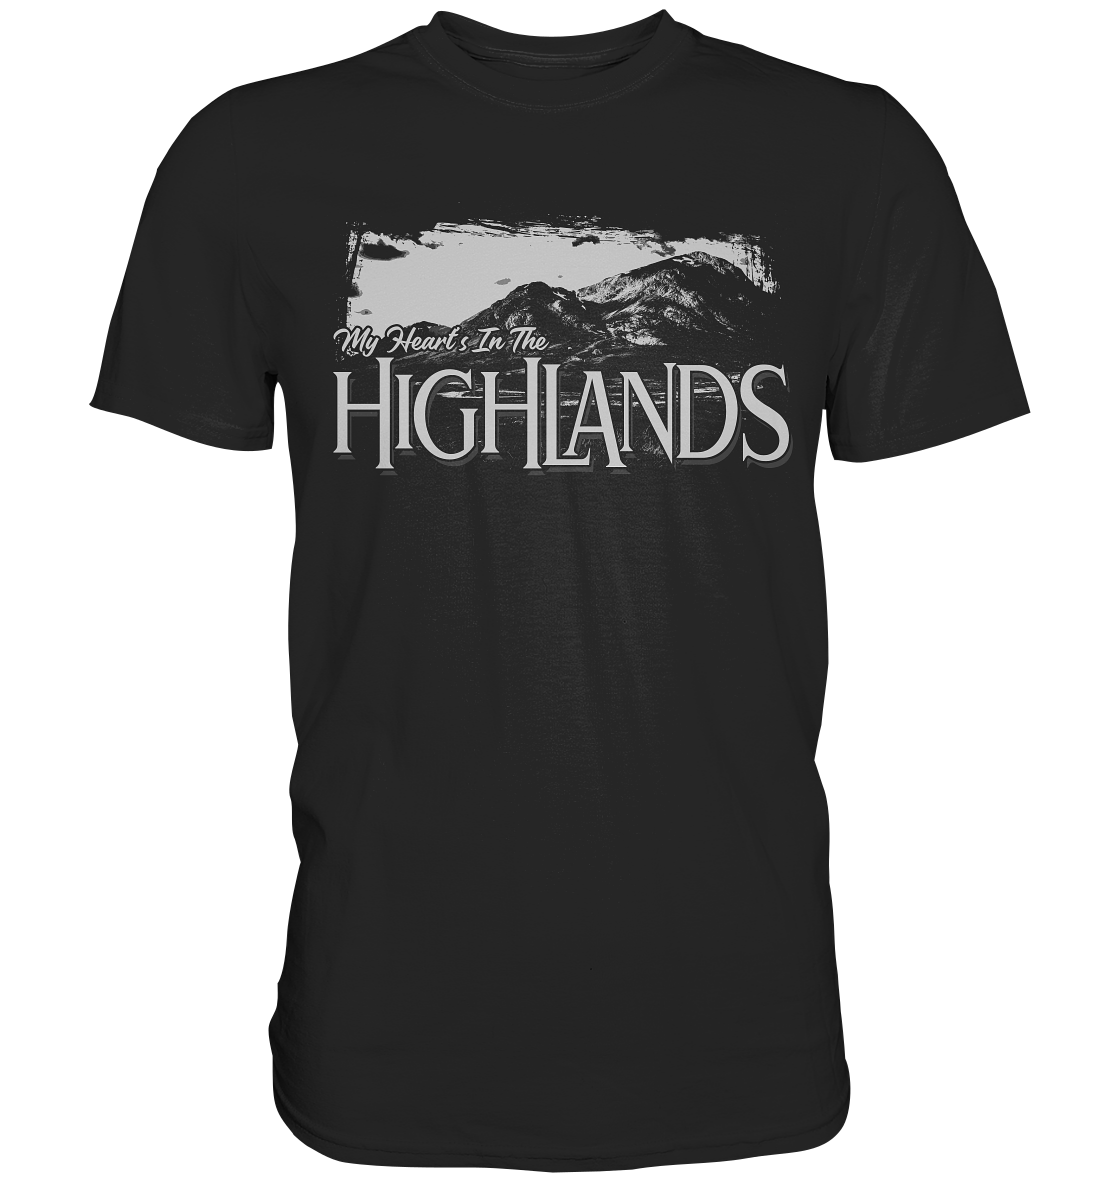 "My Heart's In The Highlands" - Premium Shirt